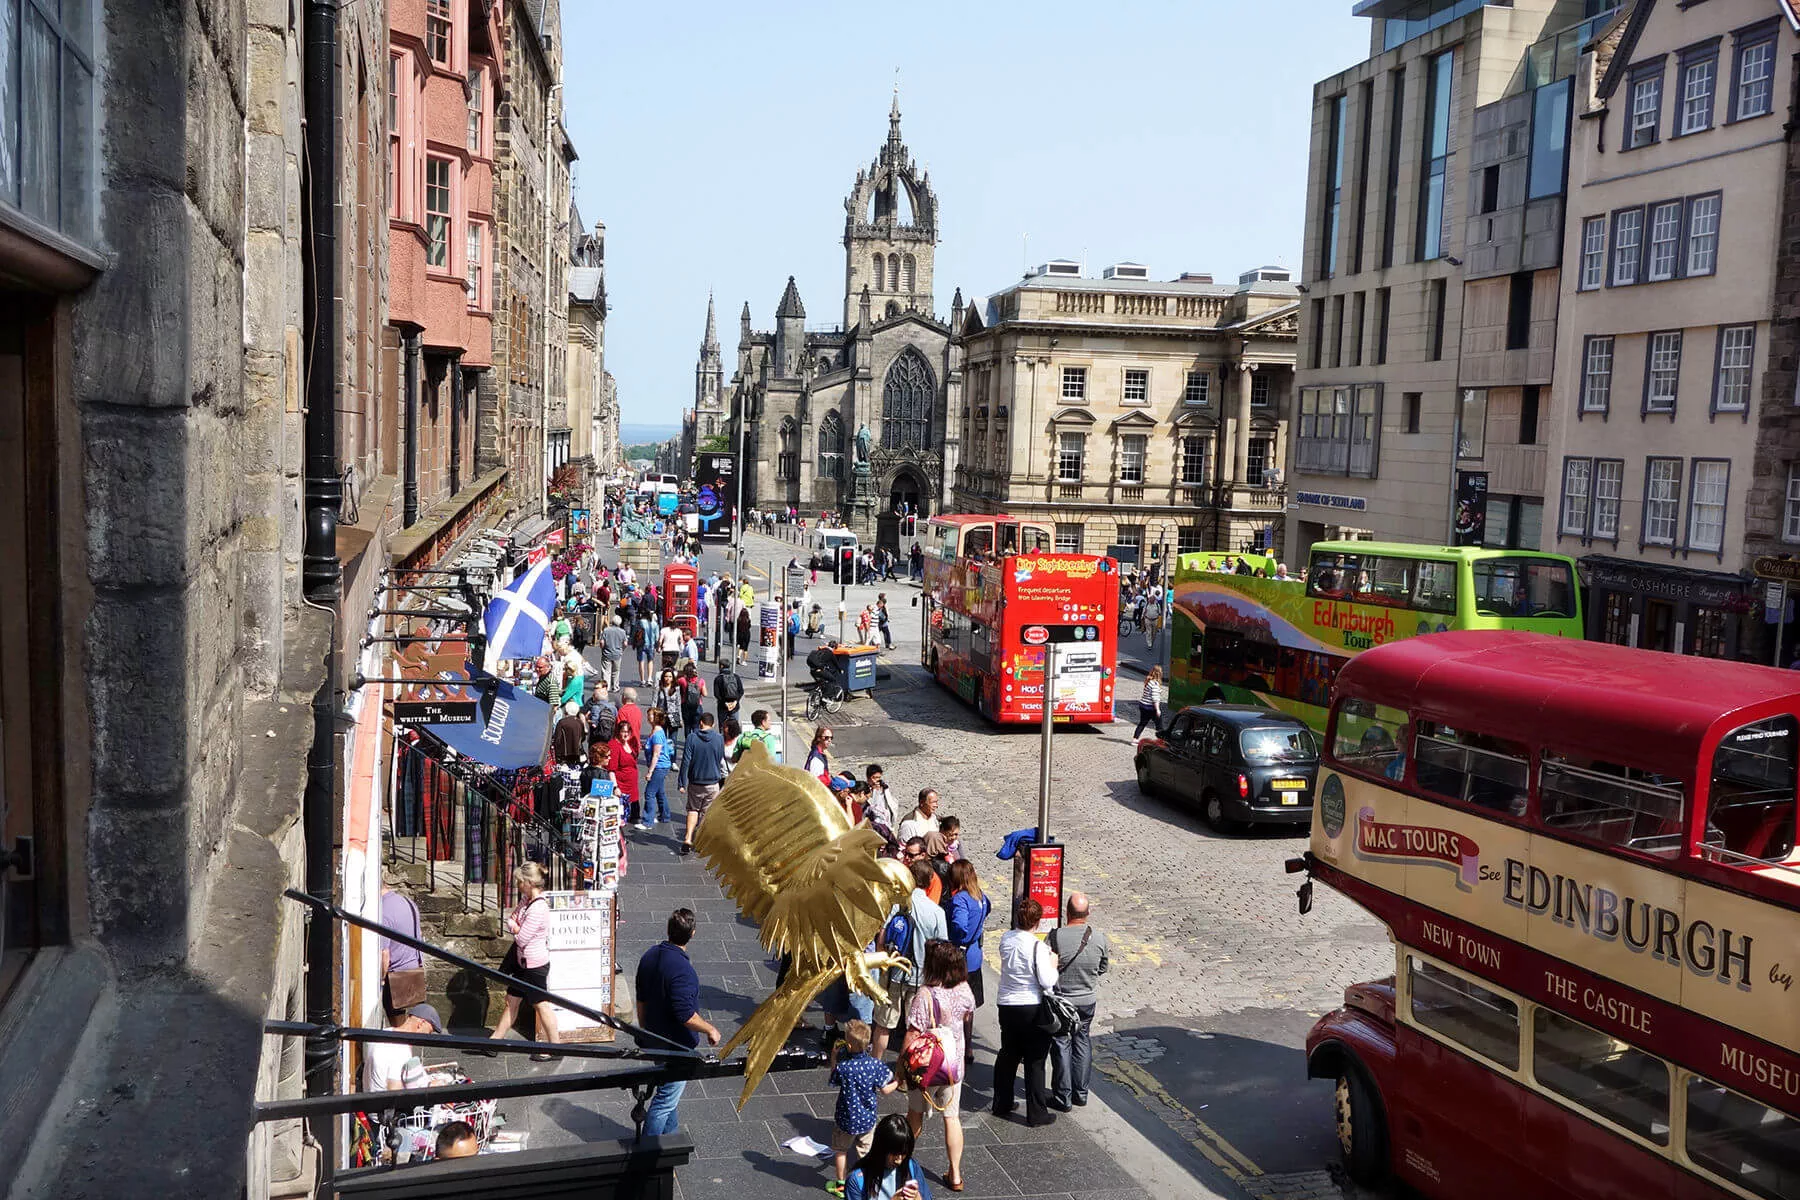 The Royal Mile offers a leisurely and fascination-filled stroll through history, souvenir shops, and tourists